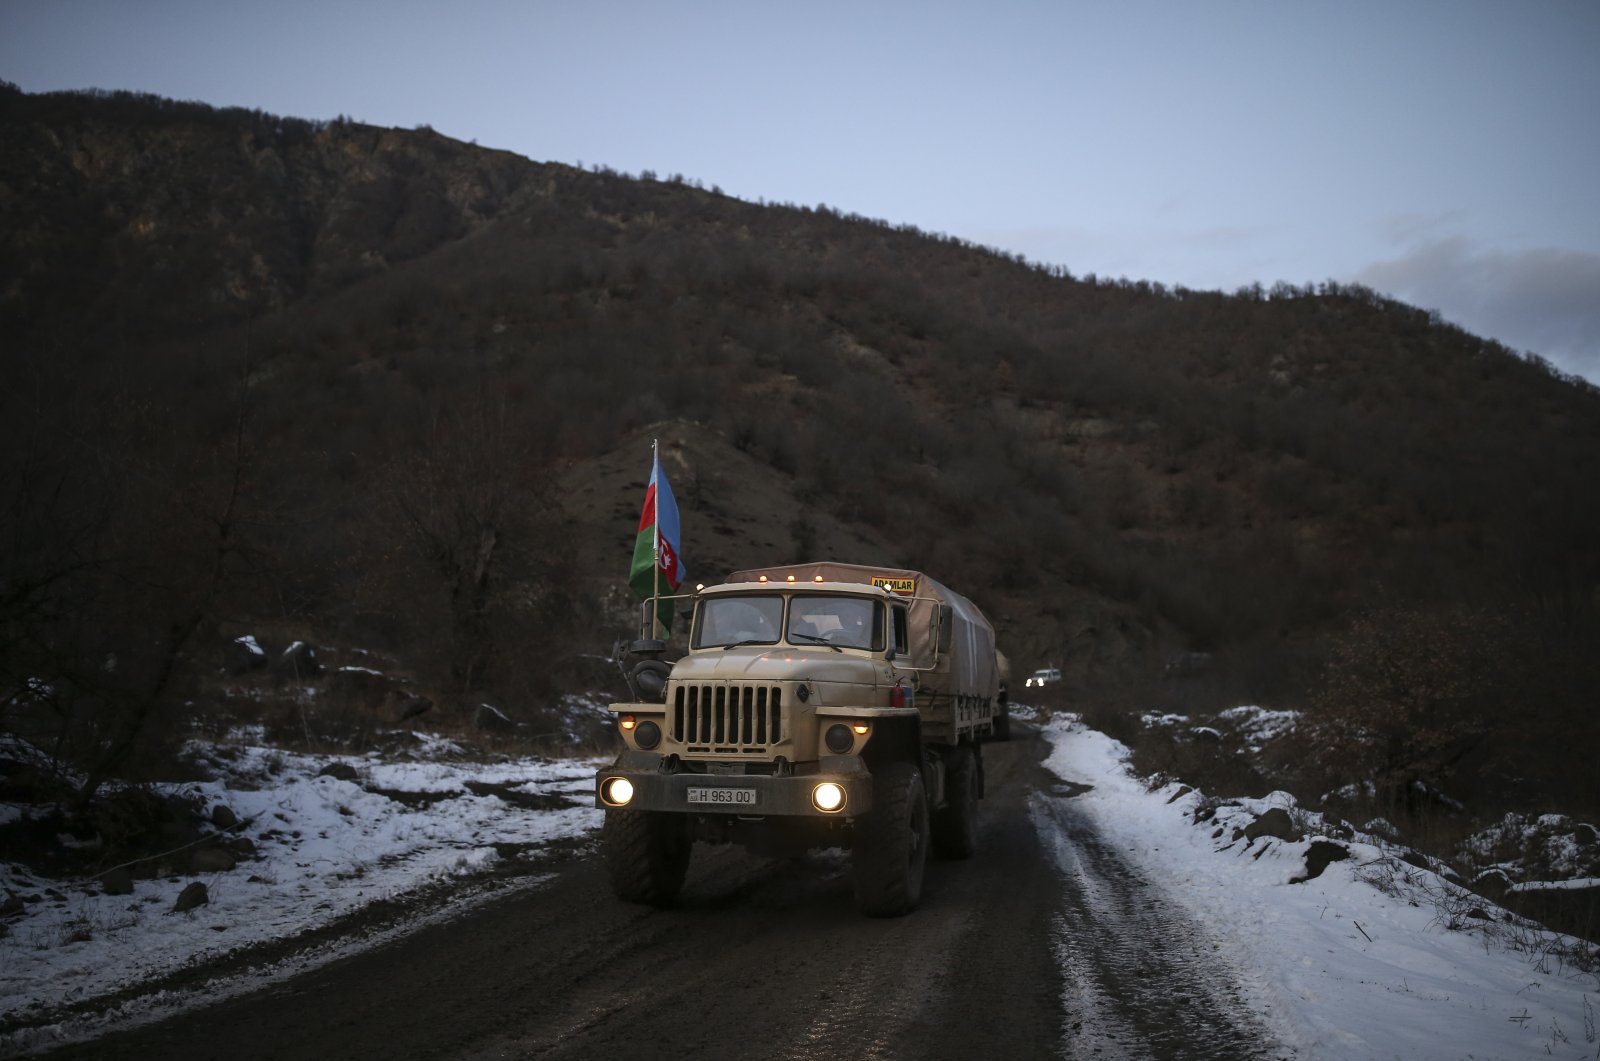 Azerbaijan&#039;s military trucks roll along a highway after the transfer of the Kalbajar region to Azerbaijan&#039;s control, as part of a peace deal that required Armenian forces to cede the Azerbaijani territories they held outside Nagorno-Karabakh, near Kalbajar, Azerbaijan, Wednesday, Dec. 2, 2020. (AP Photo)